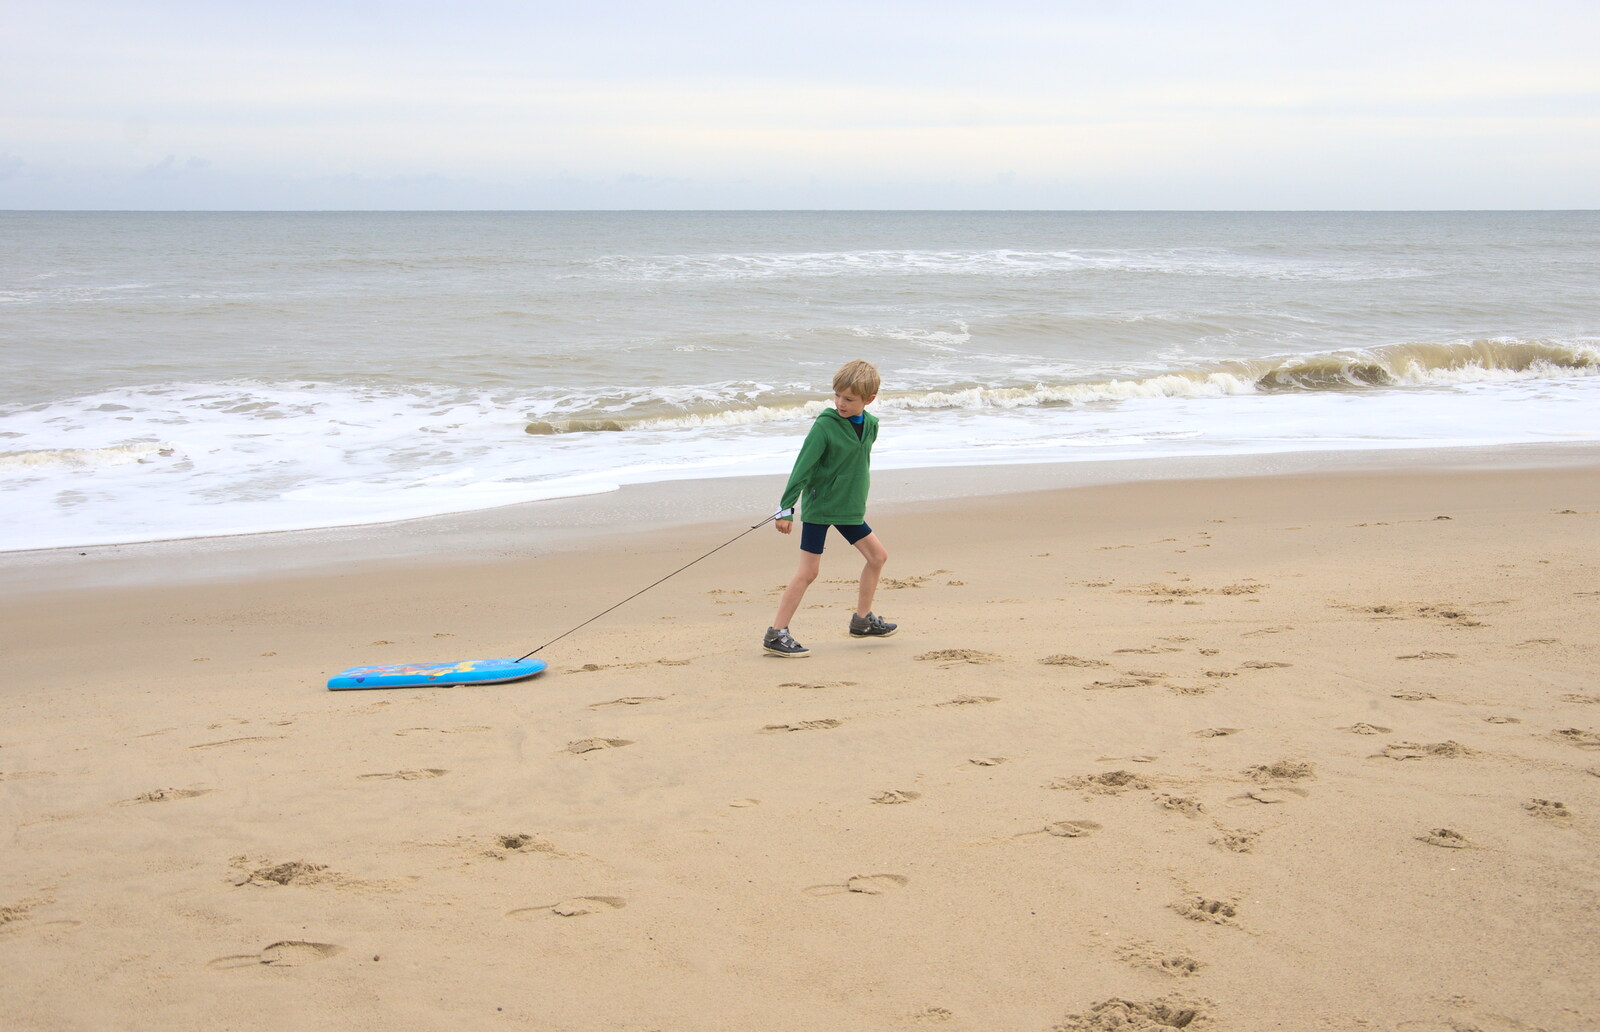 Harry drags his board around from An Optimistic Camping Weekend, Waxham Sands, Norfolk - 22nd September 2018